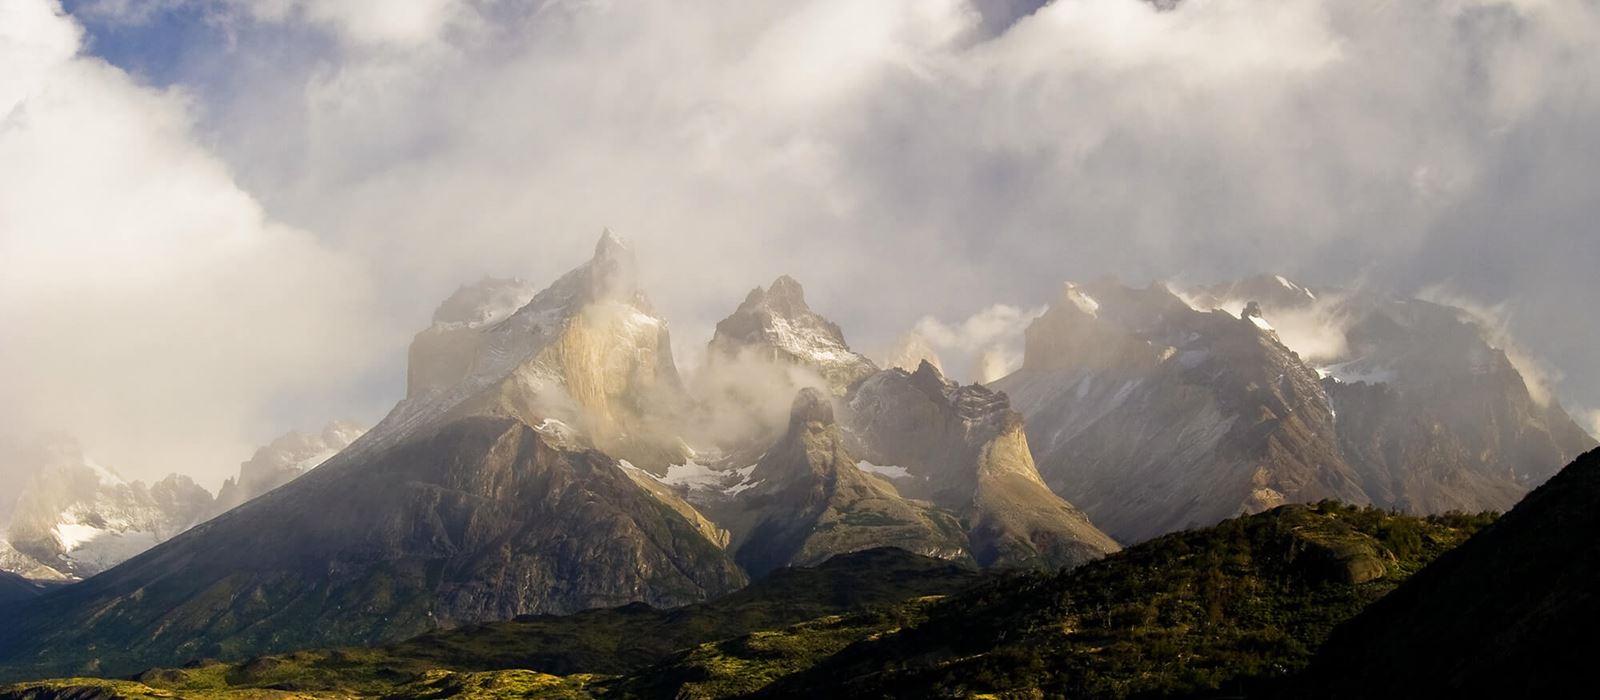 Patagonia Group Tour Discover Patagonia with Latin America Specialists